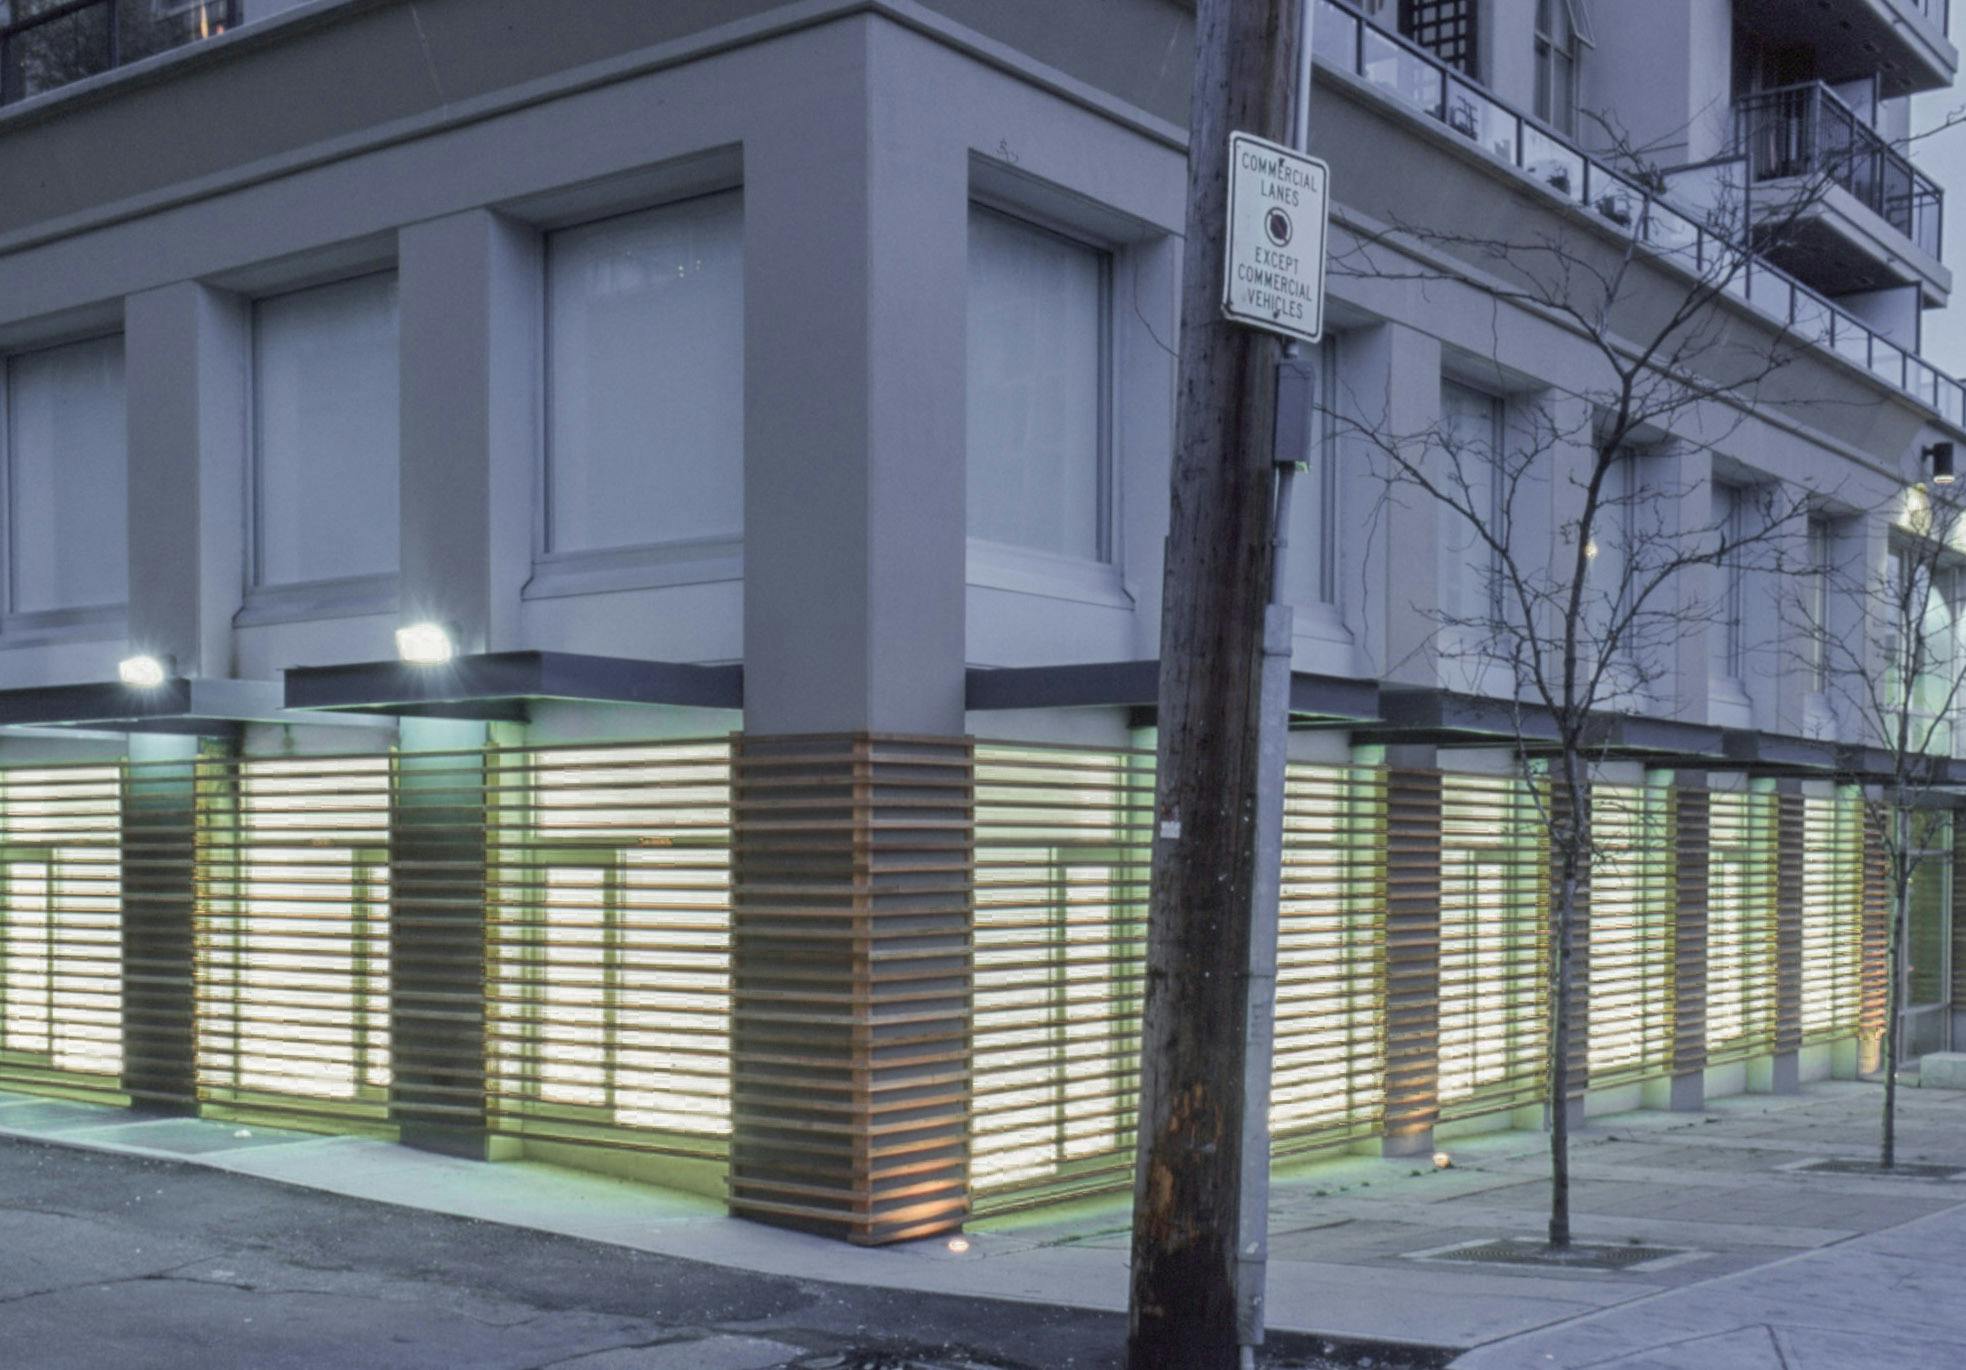 A set of sculptures that look like wooden fences covers the entire windows on CAG’s first floor. A number of horizontally arranged wooden bars cover the illuminated window spaces. 